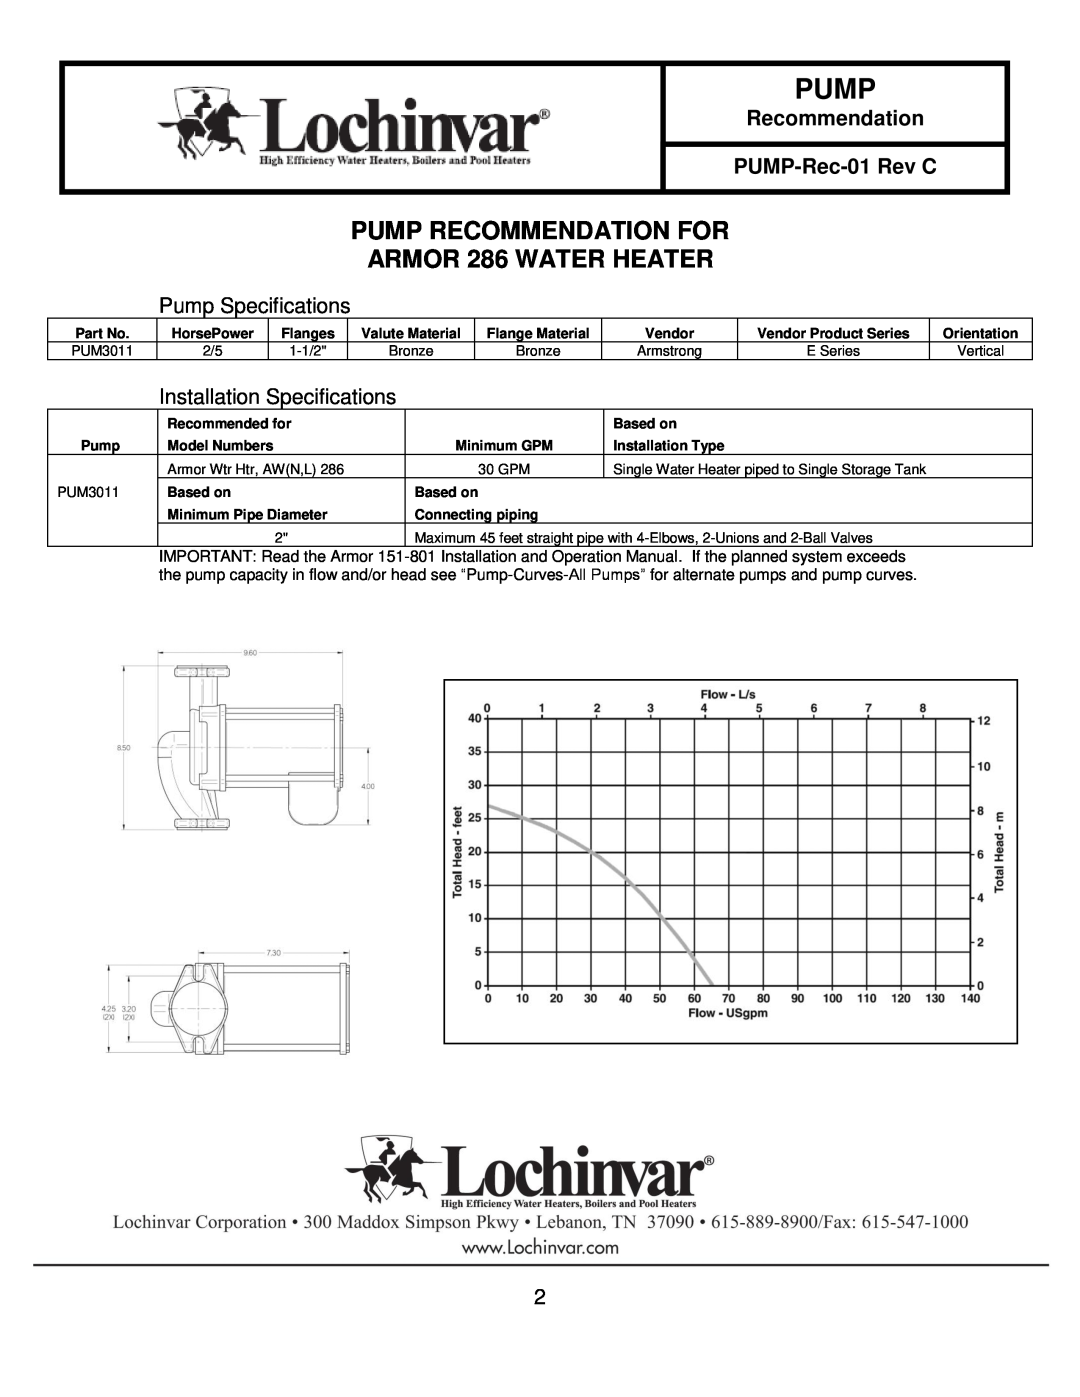 Lochinvar 151-200 ARMOR 286 WATER HEATER, Recommended for, Pump Recommendation For, Pump Specifications, Based on 